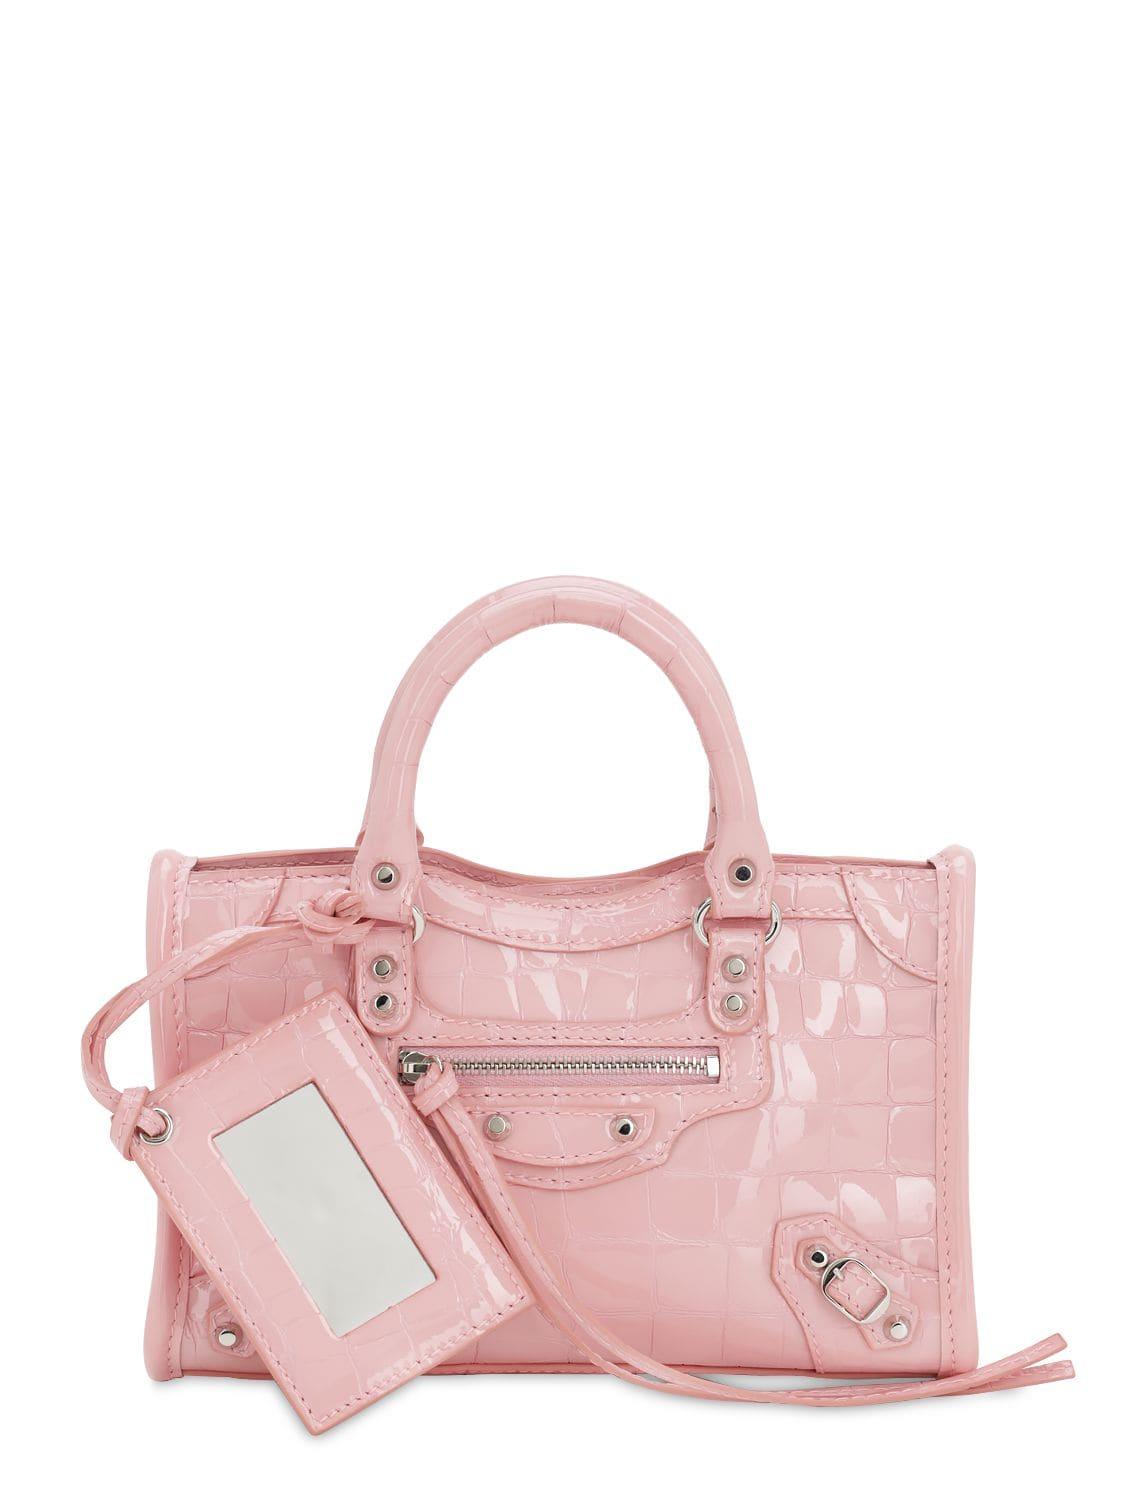 Balenciaga Nano City Croc Embossed Leather Bag in Pink